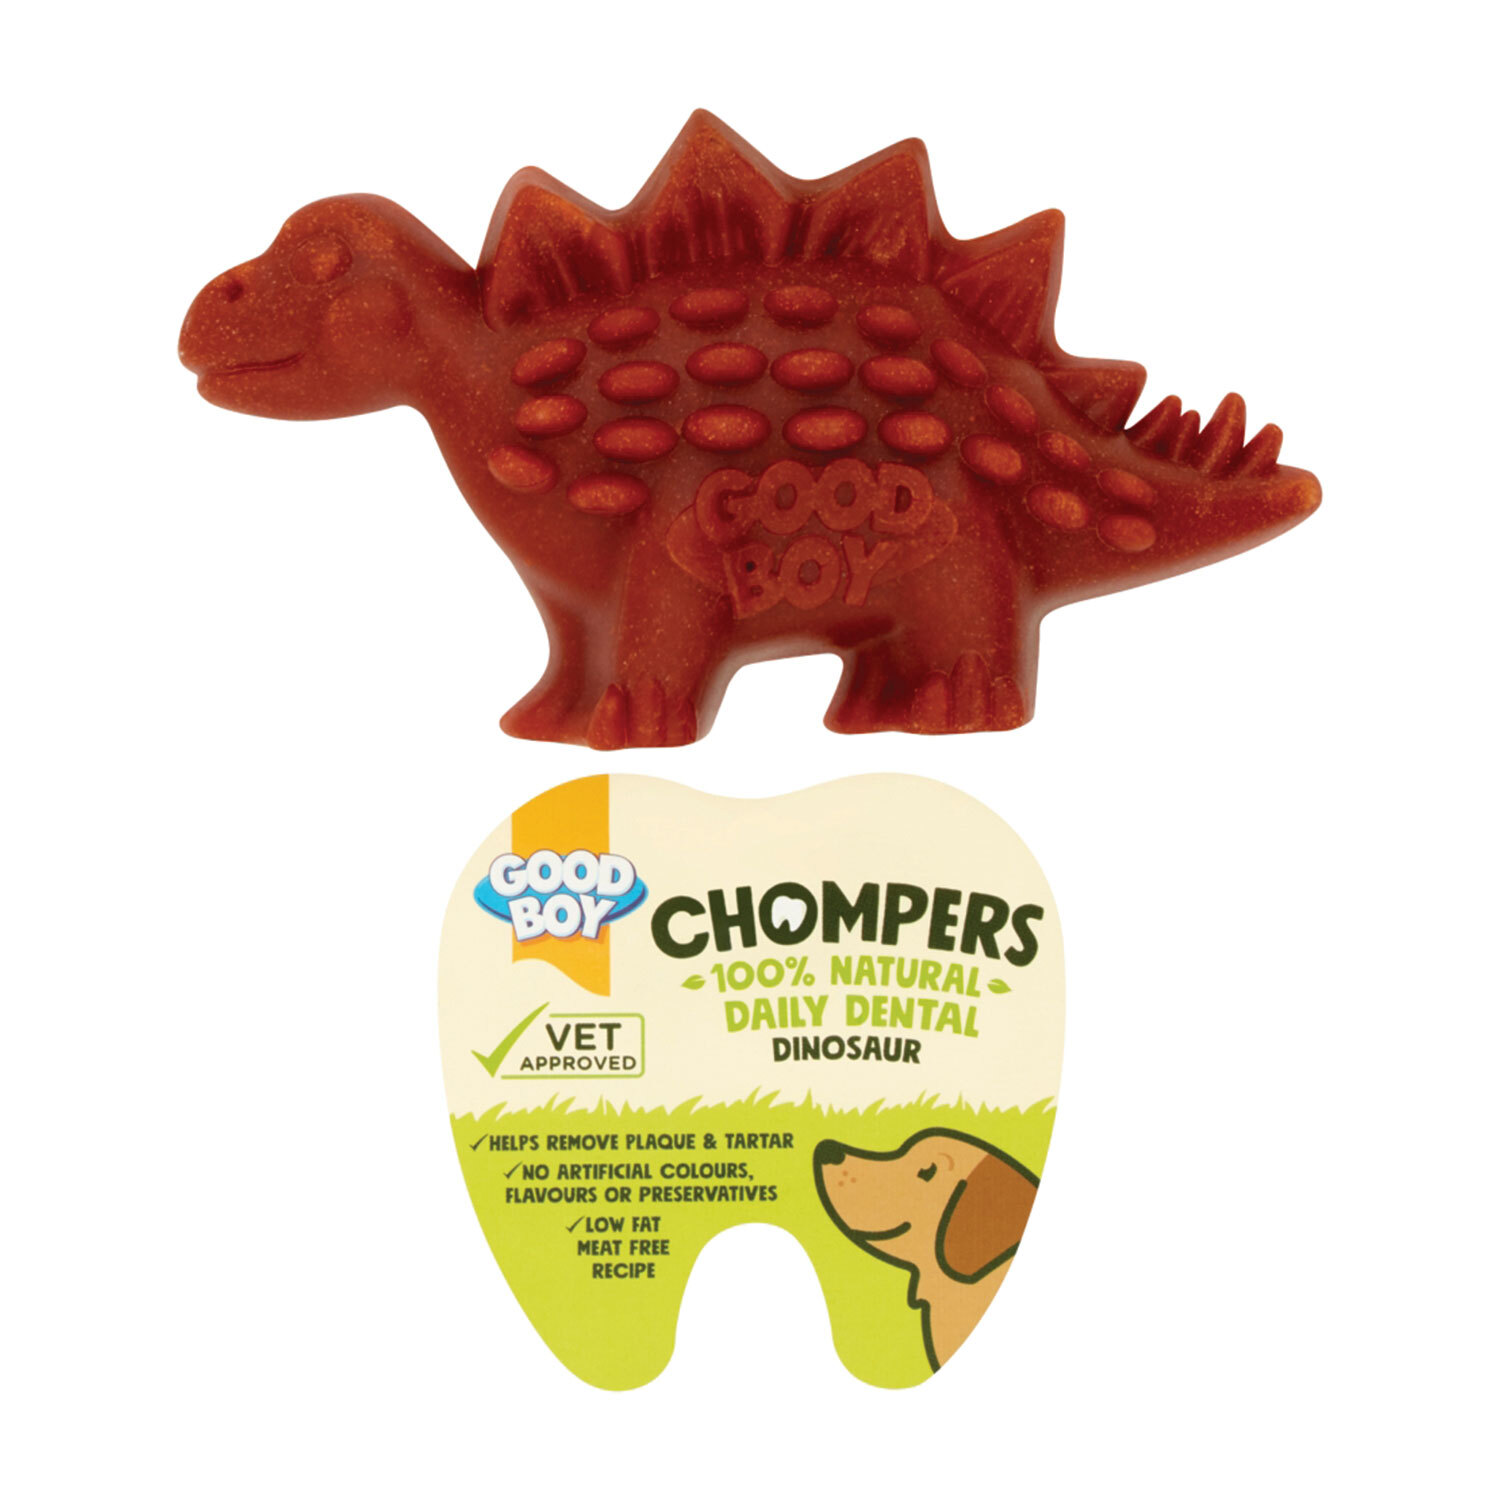 Single Clever Paws 60g Chompers Dental Dino Dog Treat in Assorted styles Image 1